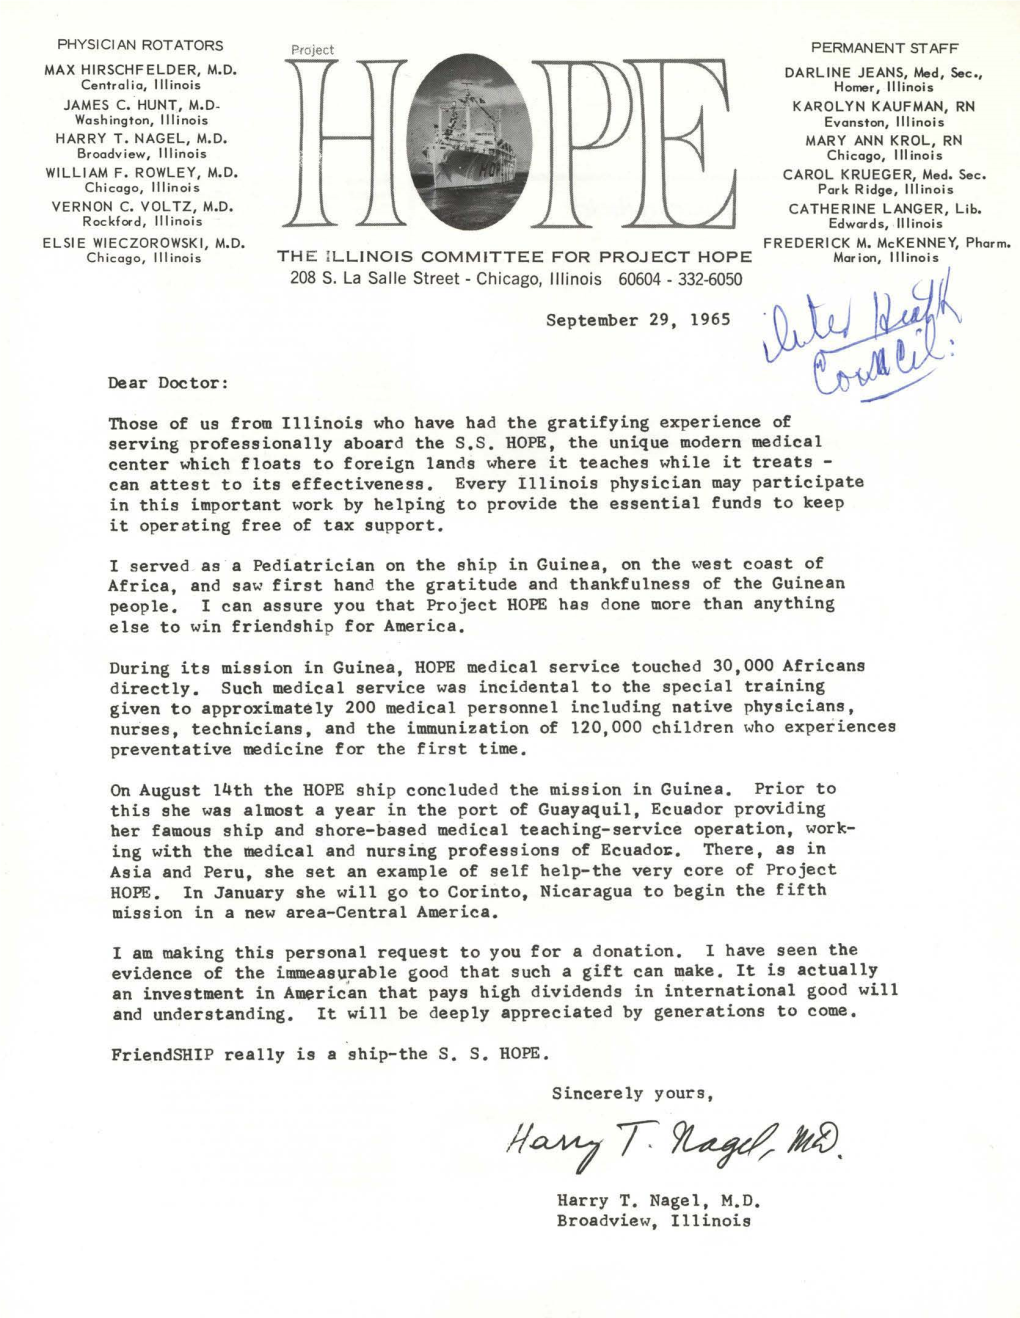 Letter from Harry T. Nagel, M.D. to Dear Doctor